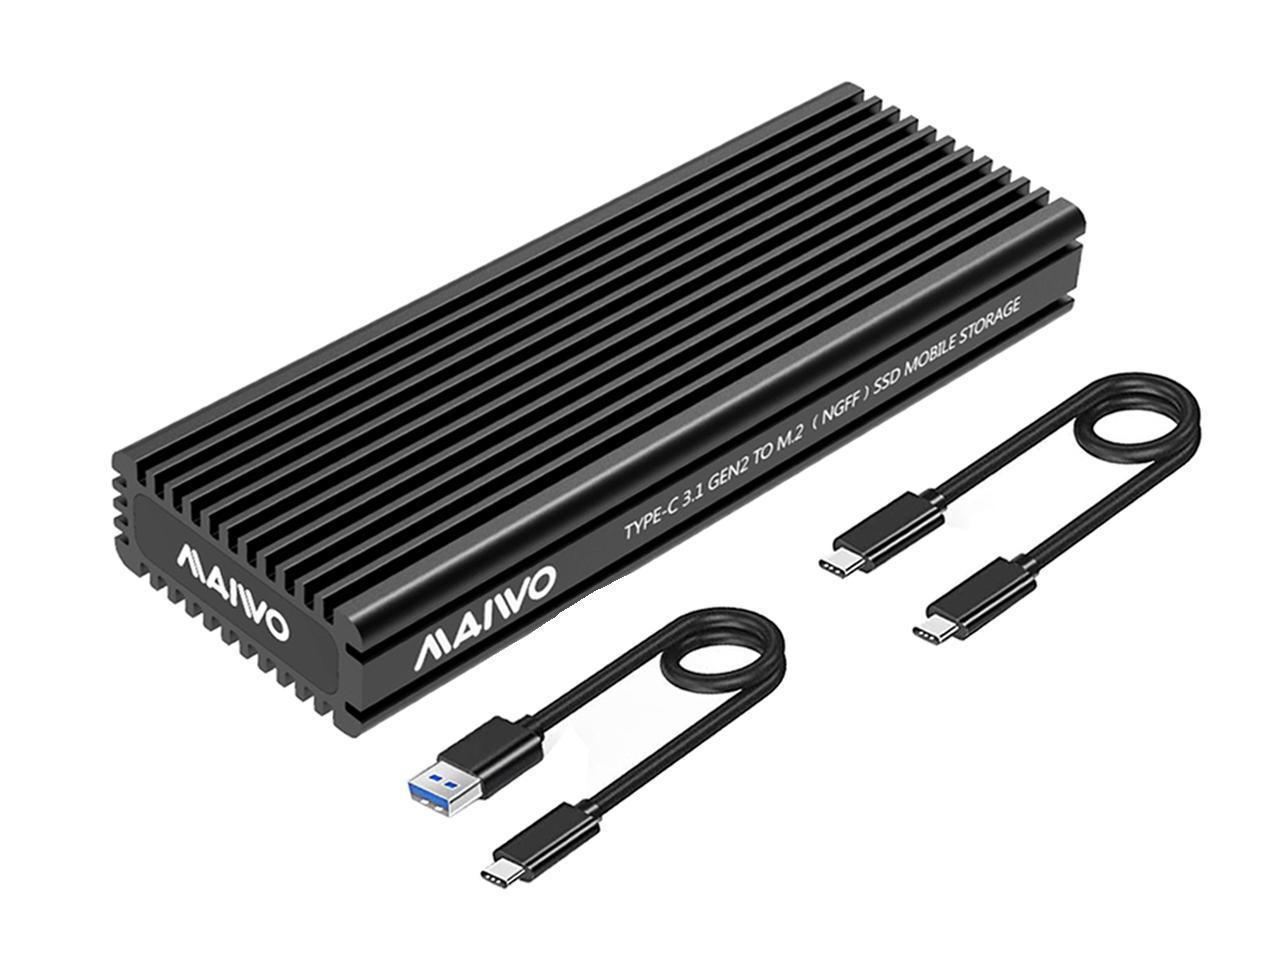 MAIWO M.2 SATA and NVMe Combo SSD Enclosure with Aluminum Heat Sink Shell,  USB3.2 Gen2 Type C 10Gbps. Fits B+M key and M-key M.2 2242,2260,2280,Type C  